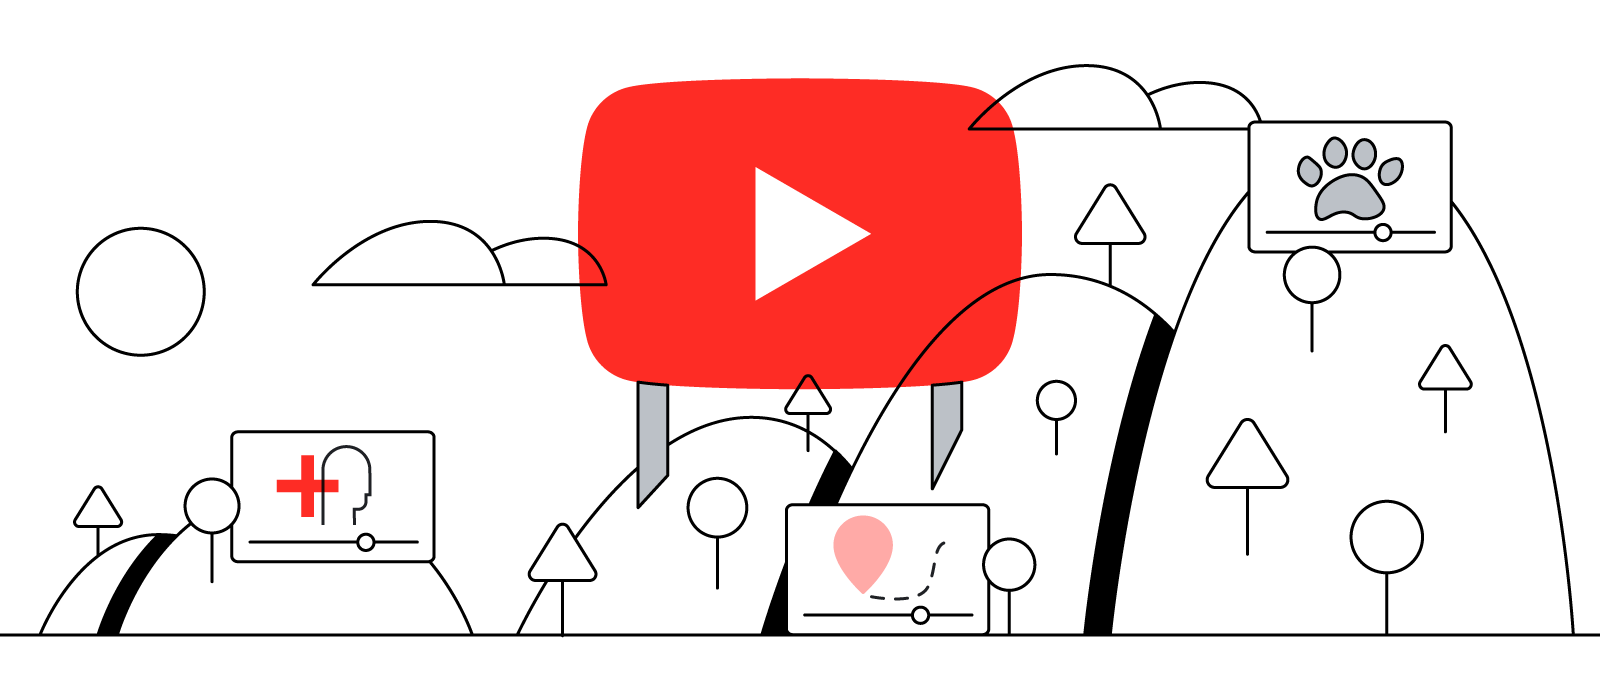 An illustration of a billboard with a YouTube logo stands on a chain of four mountains. Three video players are layered on top: one containing a person's head and a red plus sign, one with a balloon, and one with a paw print.